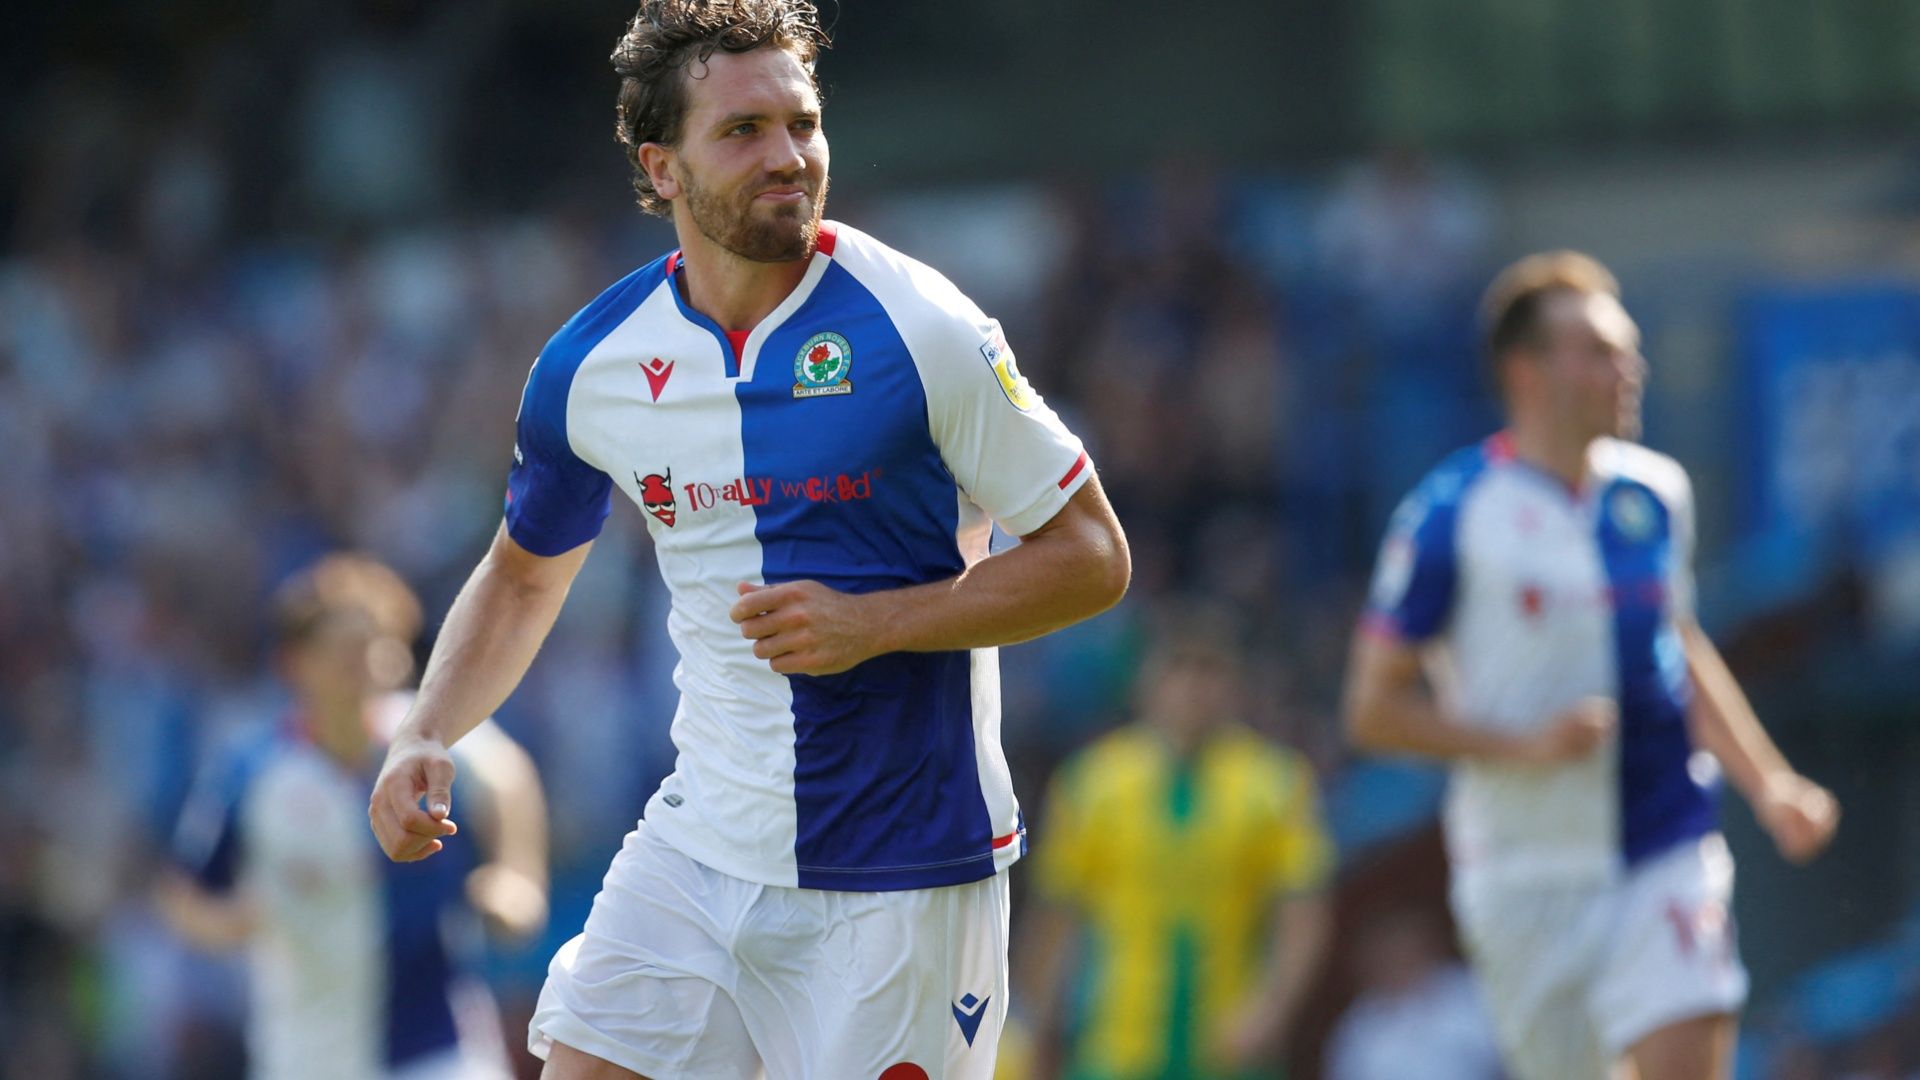 Luton Town do not need to sign Blackburn Rovers' Sam Gallagher